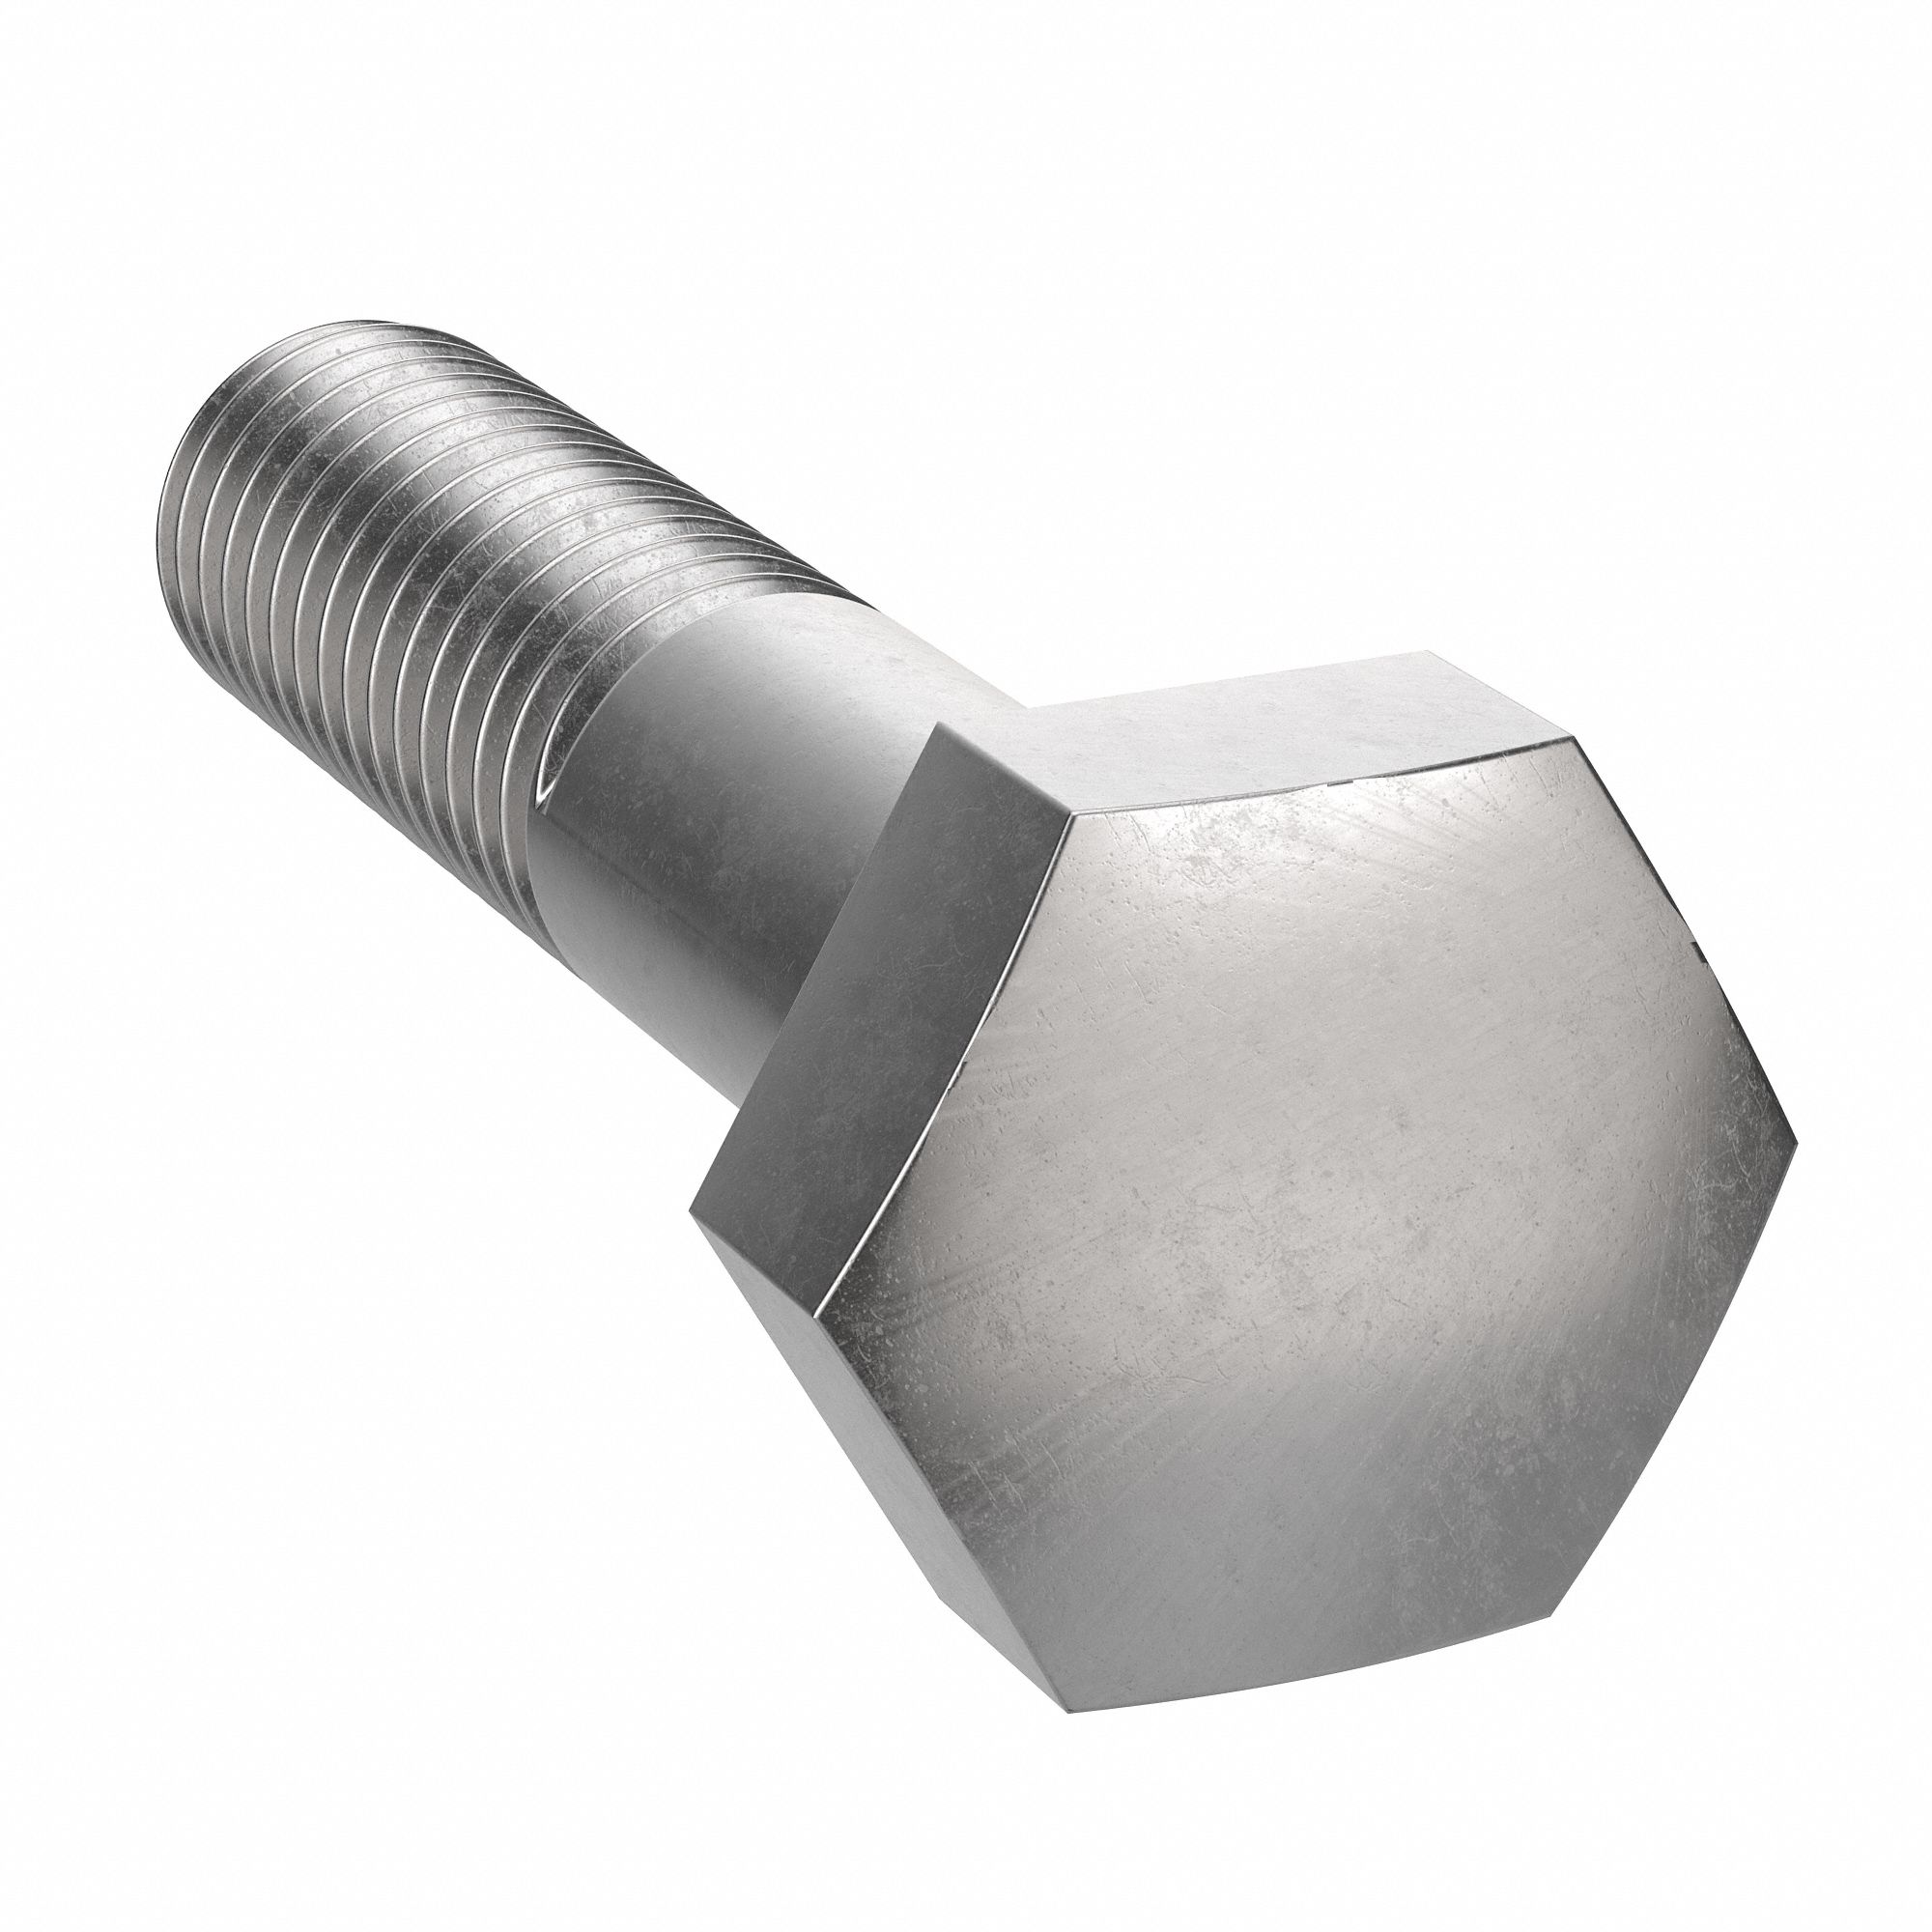 1//2-13 Threads 5-1//2 Length Meets ASME B18.2.1//SAE J429 Pack of 5 Grade 8 Steel Hex Bolt Partially Threaded Hex Head External Hex Drive Plain Finish Made in US